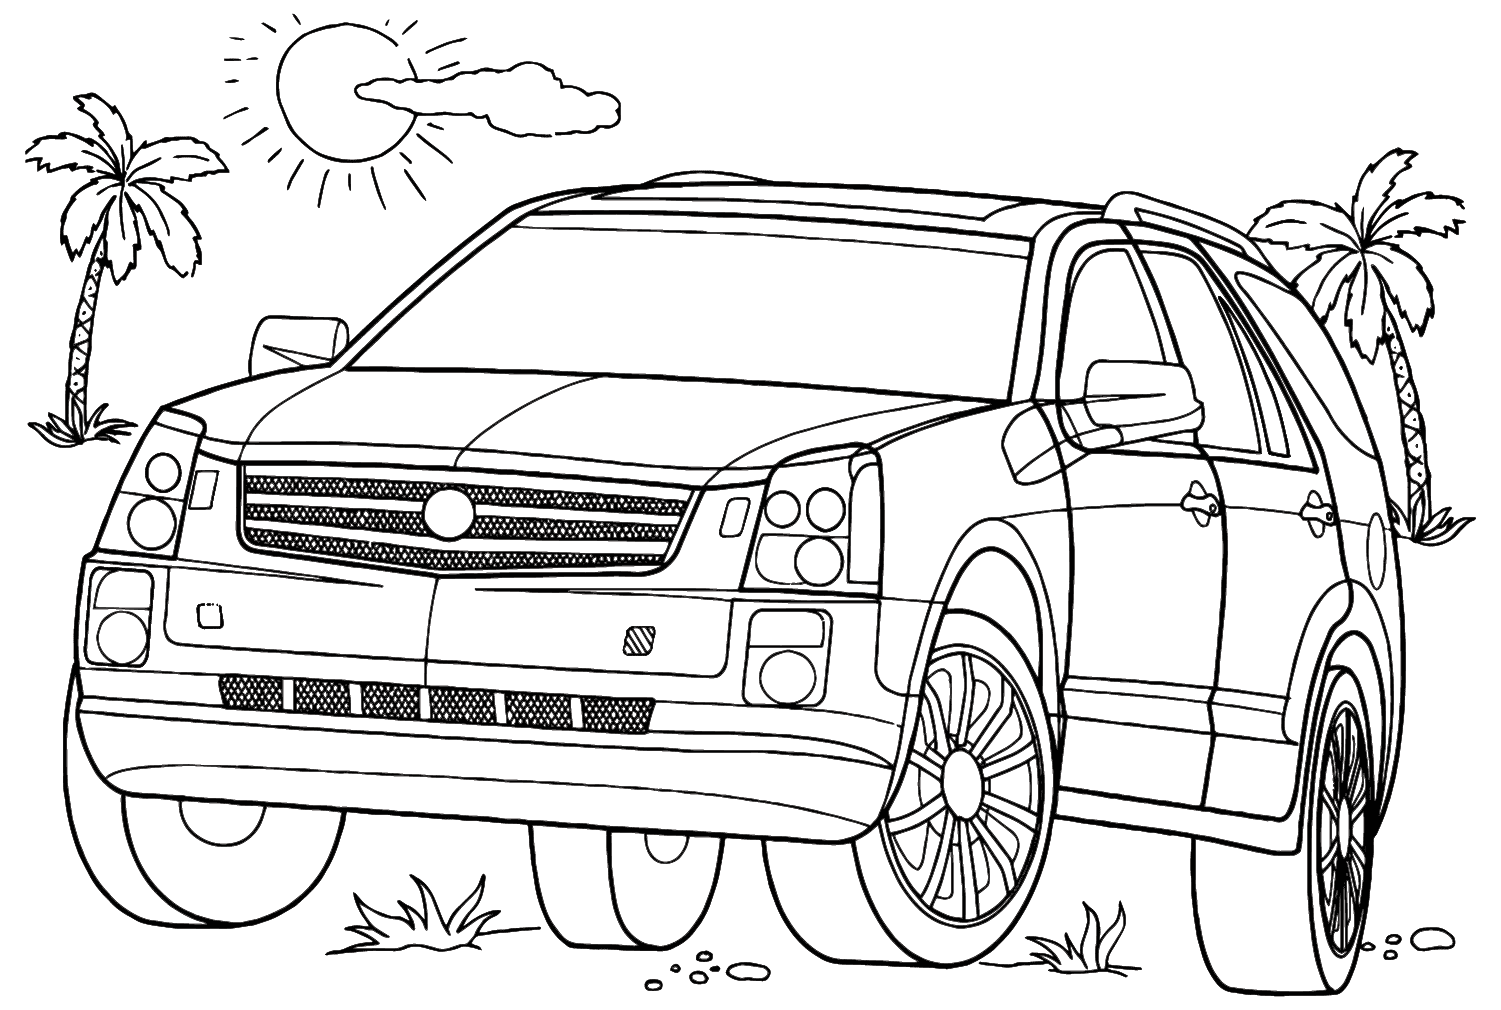 Cadillac Coloring Pages to Download